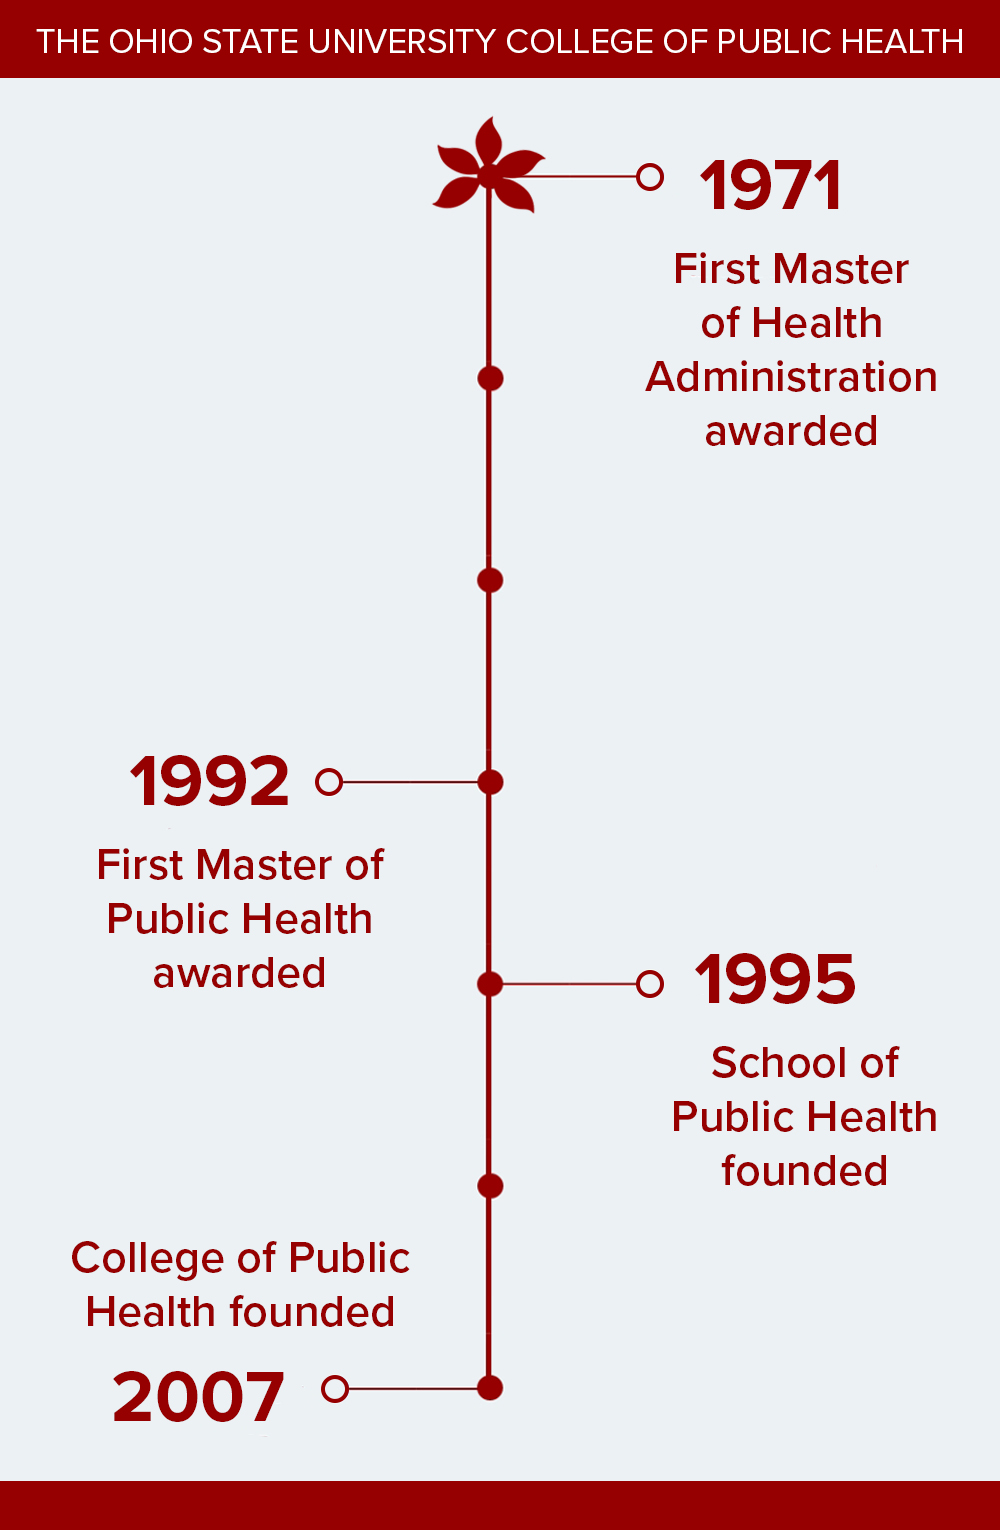 Timeline of the College of Public Health